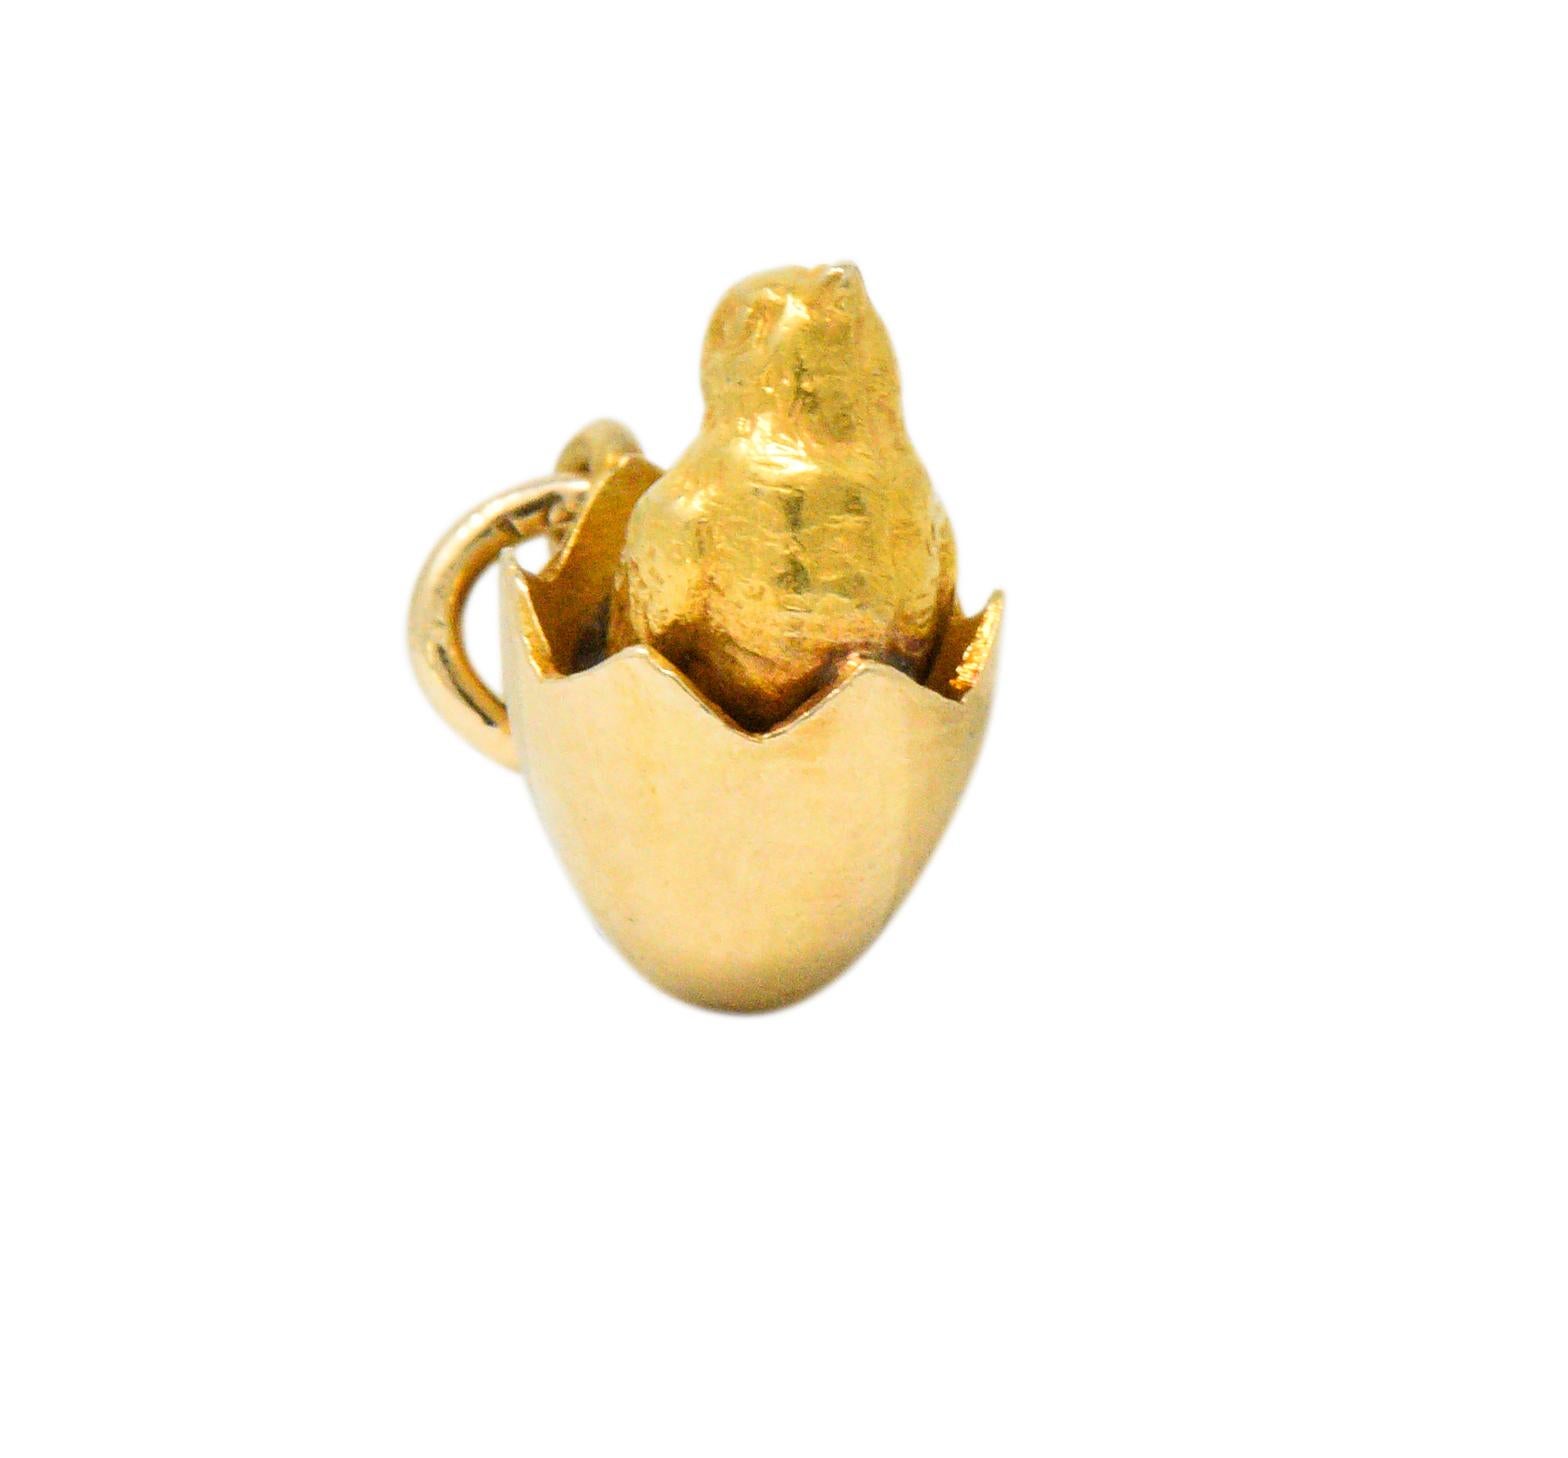 Featuring a dimensional baby chick hatching from an egg

Detailed and tested as 14k gold

Circa 1900

Measures 9 mm x 5.5 mm

Total Weight: 1.1 grams

Sweet. Delightful. Quaint.

We- 1848